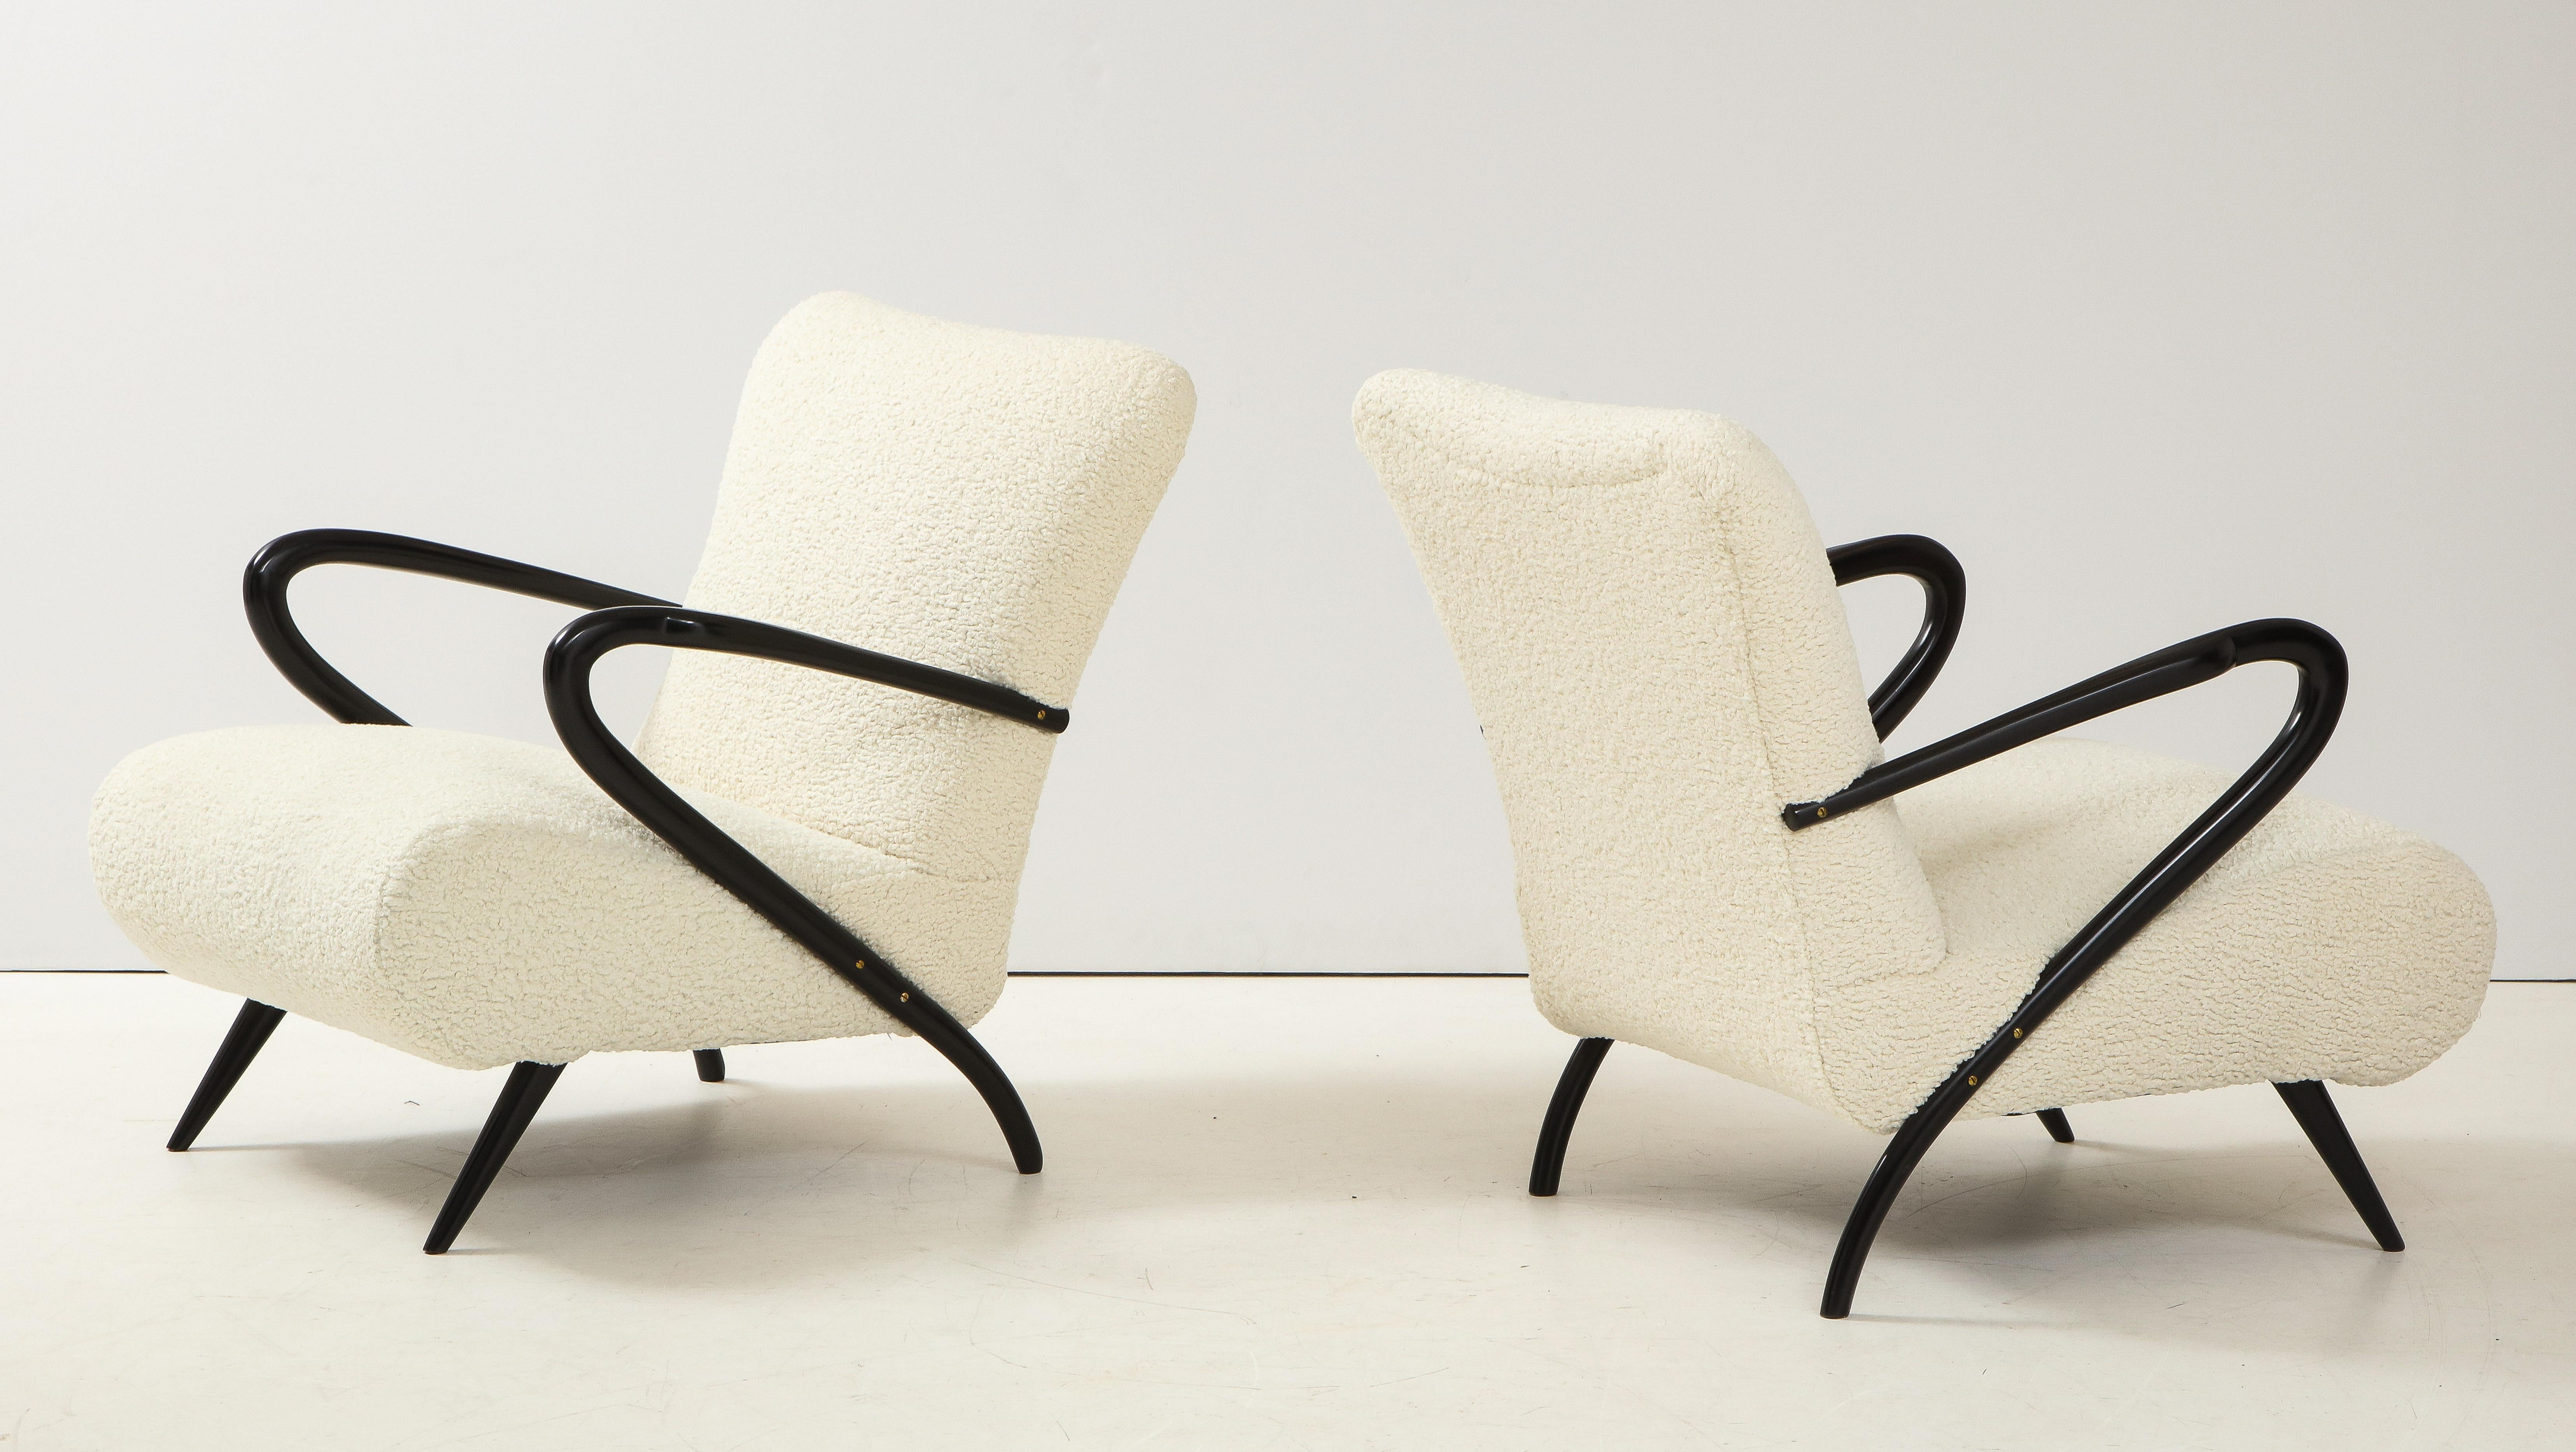 Stunning pair of 1950's sculptural lounge chairs designed by Paolo Buffa, fully restored and re-upholstered in Boublè fabric.